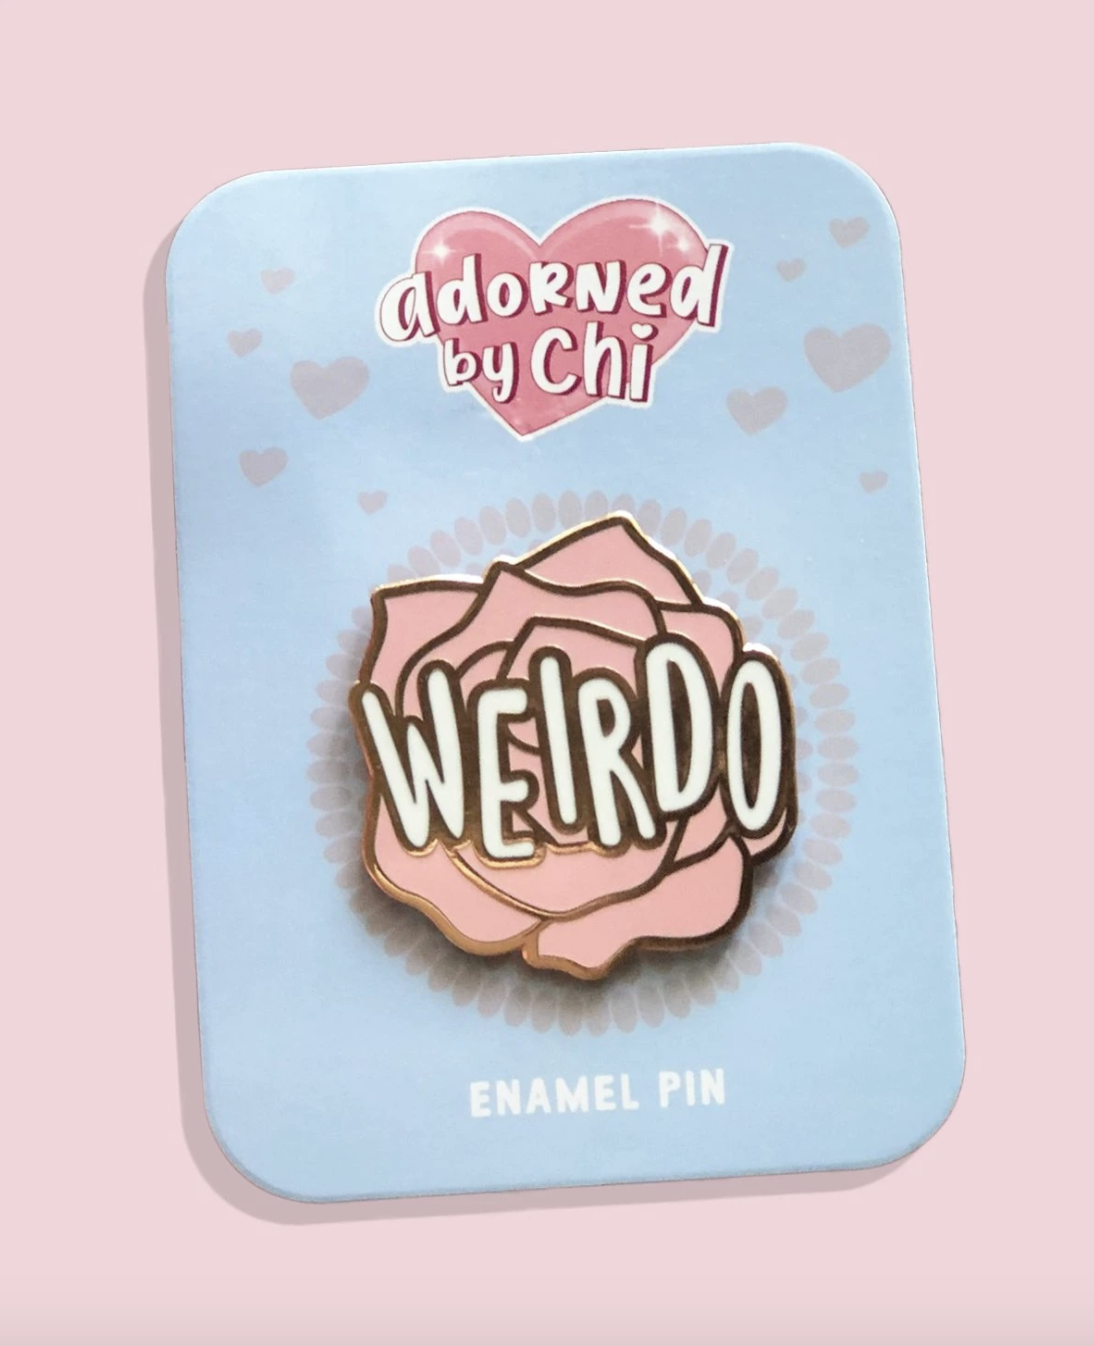 pin has pink flower with the word &quot;weirdo&quot; on it in white letters and gold outline 